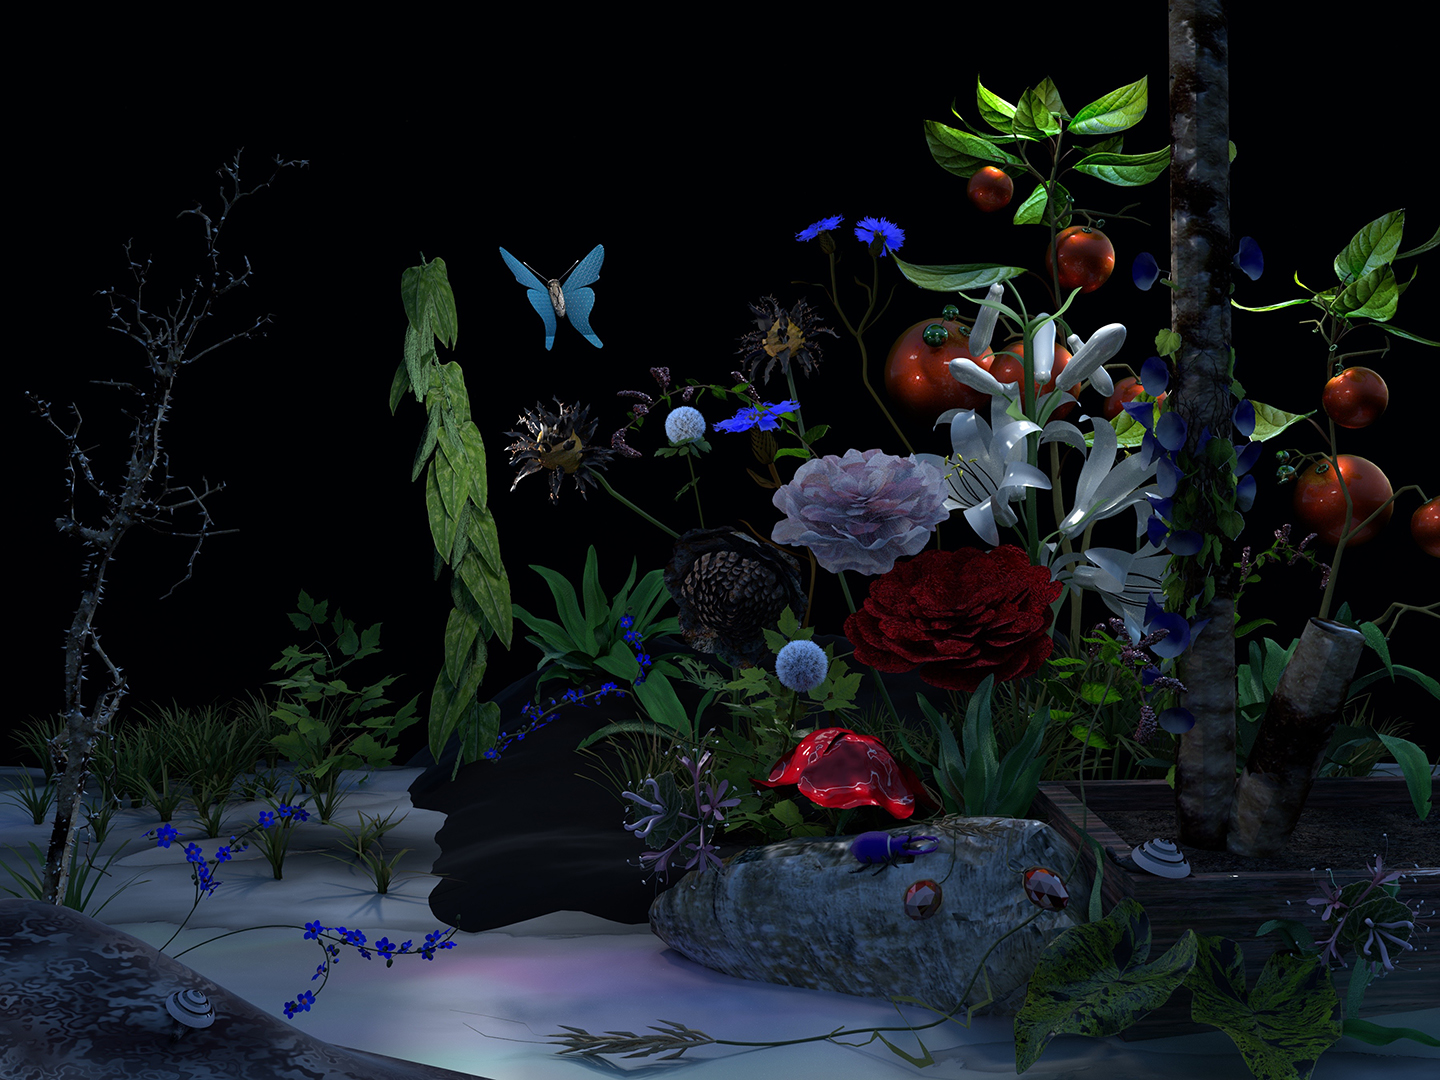 3D modeled image of dark forest with elaborate foliage and insects.